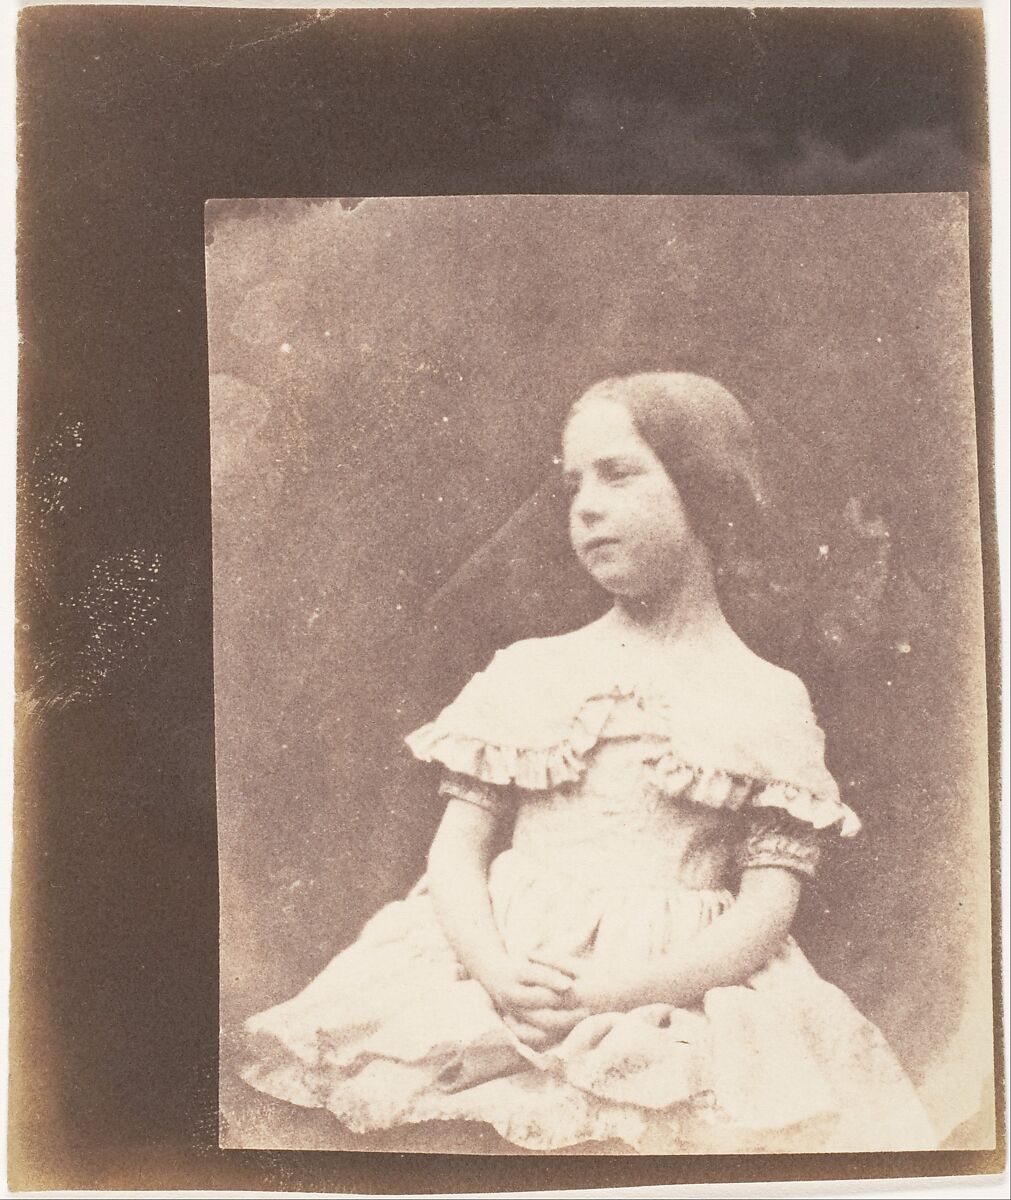 [The Photographer's Daughter], William Henry Fox Talbot (British, Dorset 1800–1877 Lacock), Salted paper print from paper negative 